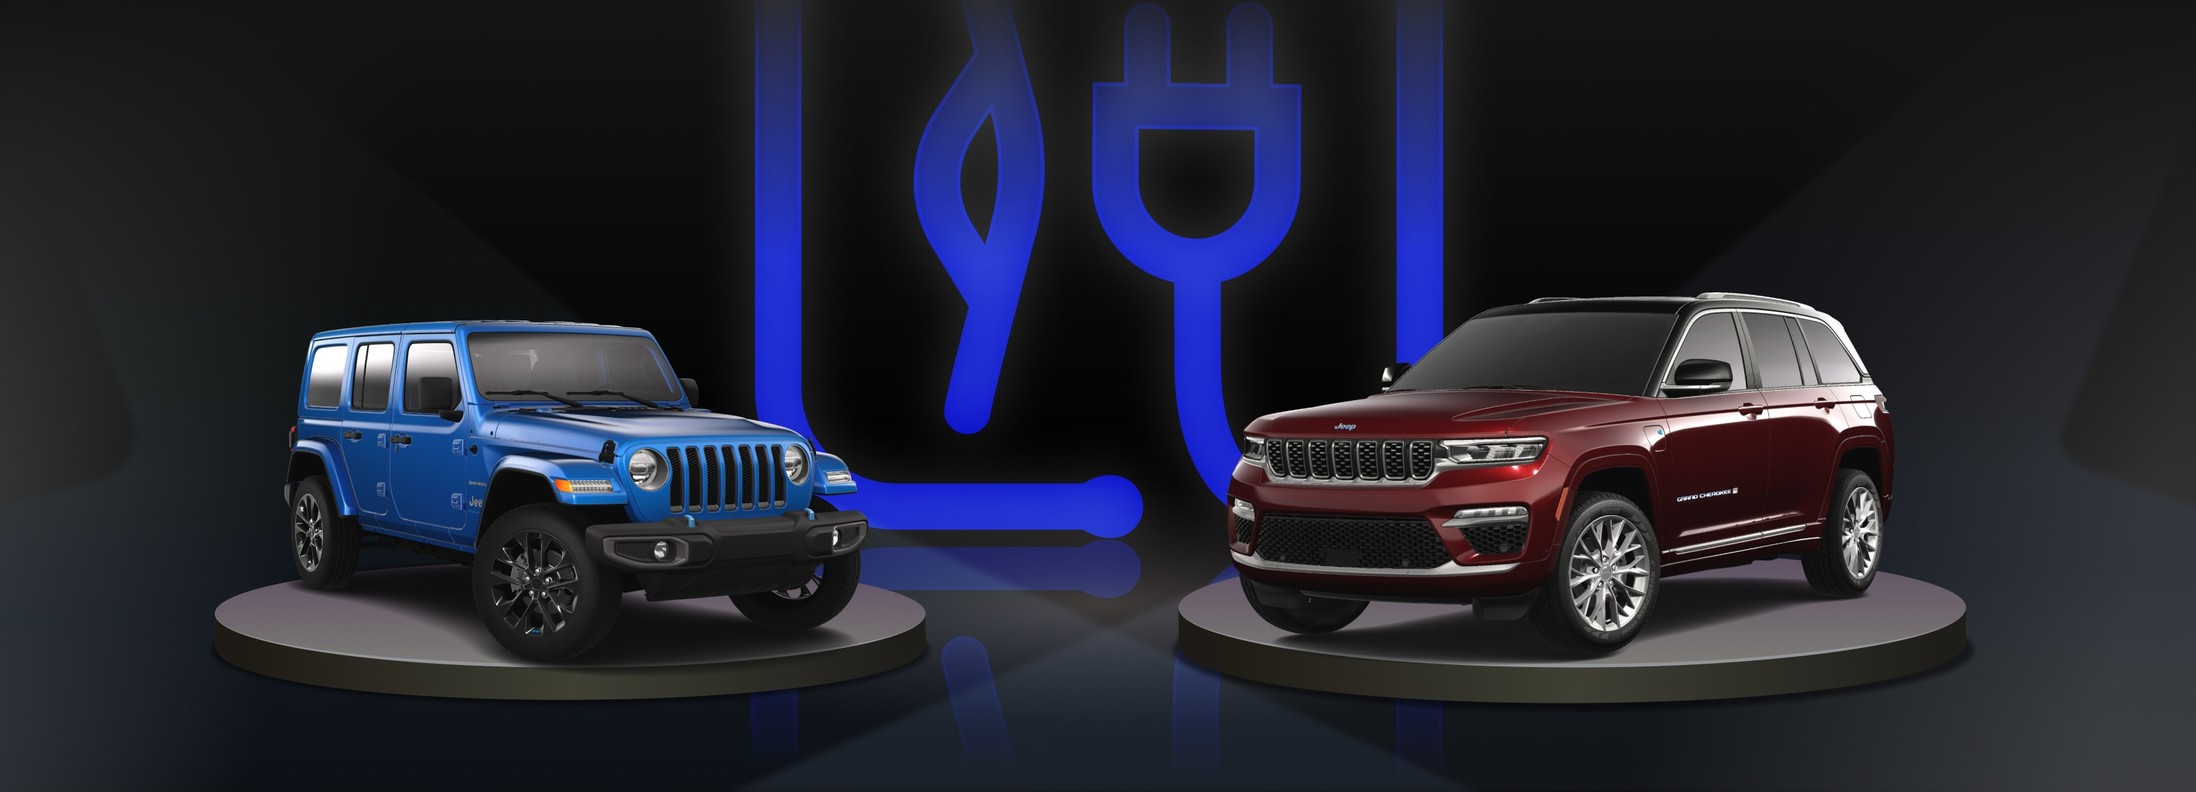 View of a bleu 2023 Jeep Wrangler and a red 2023 Jeep Grand Cherokee against a black background.